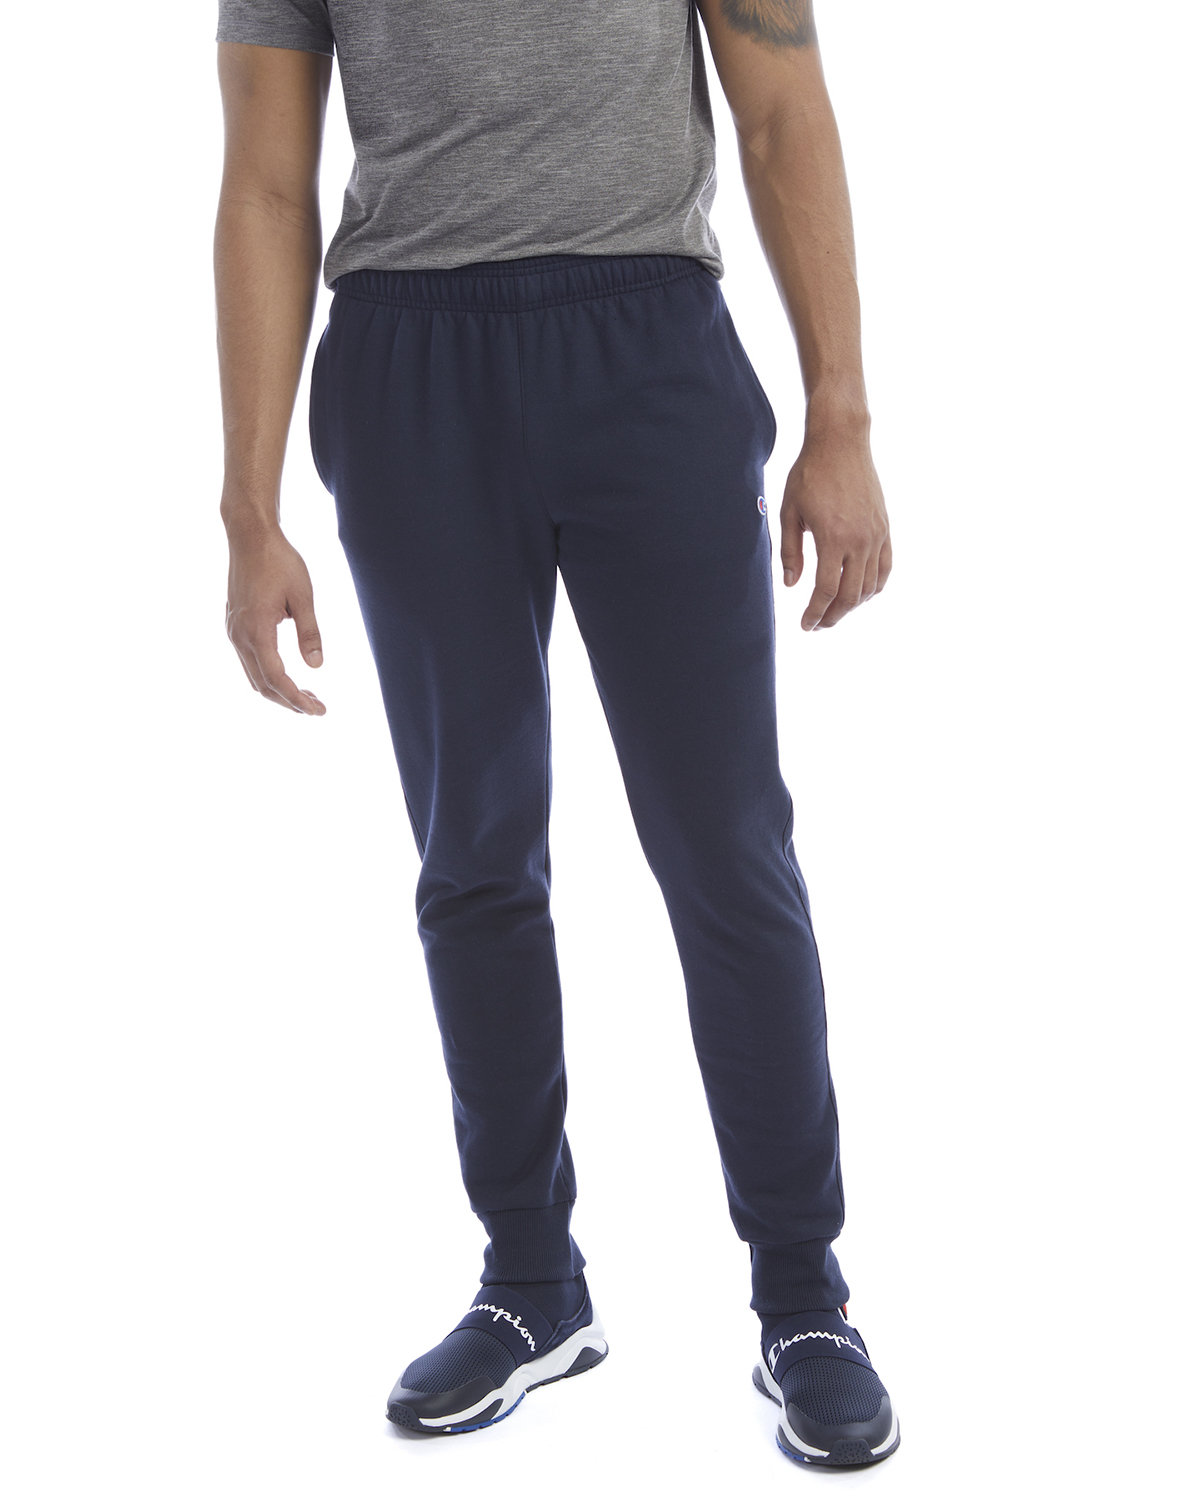 Power Blend Sweatpants with Bowdoin on Leg from Champion – The Bowdoin Store